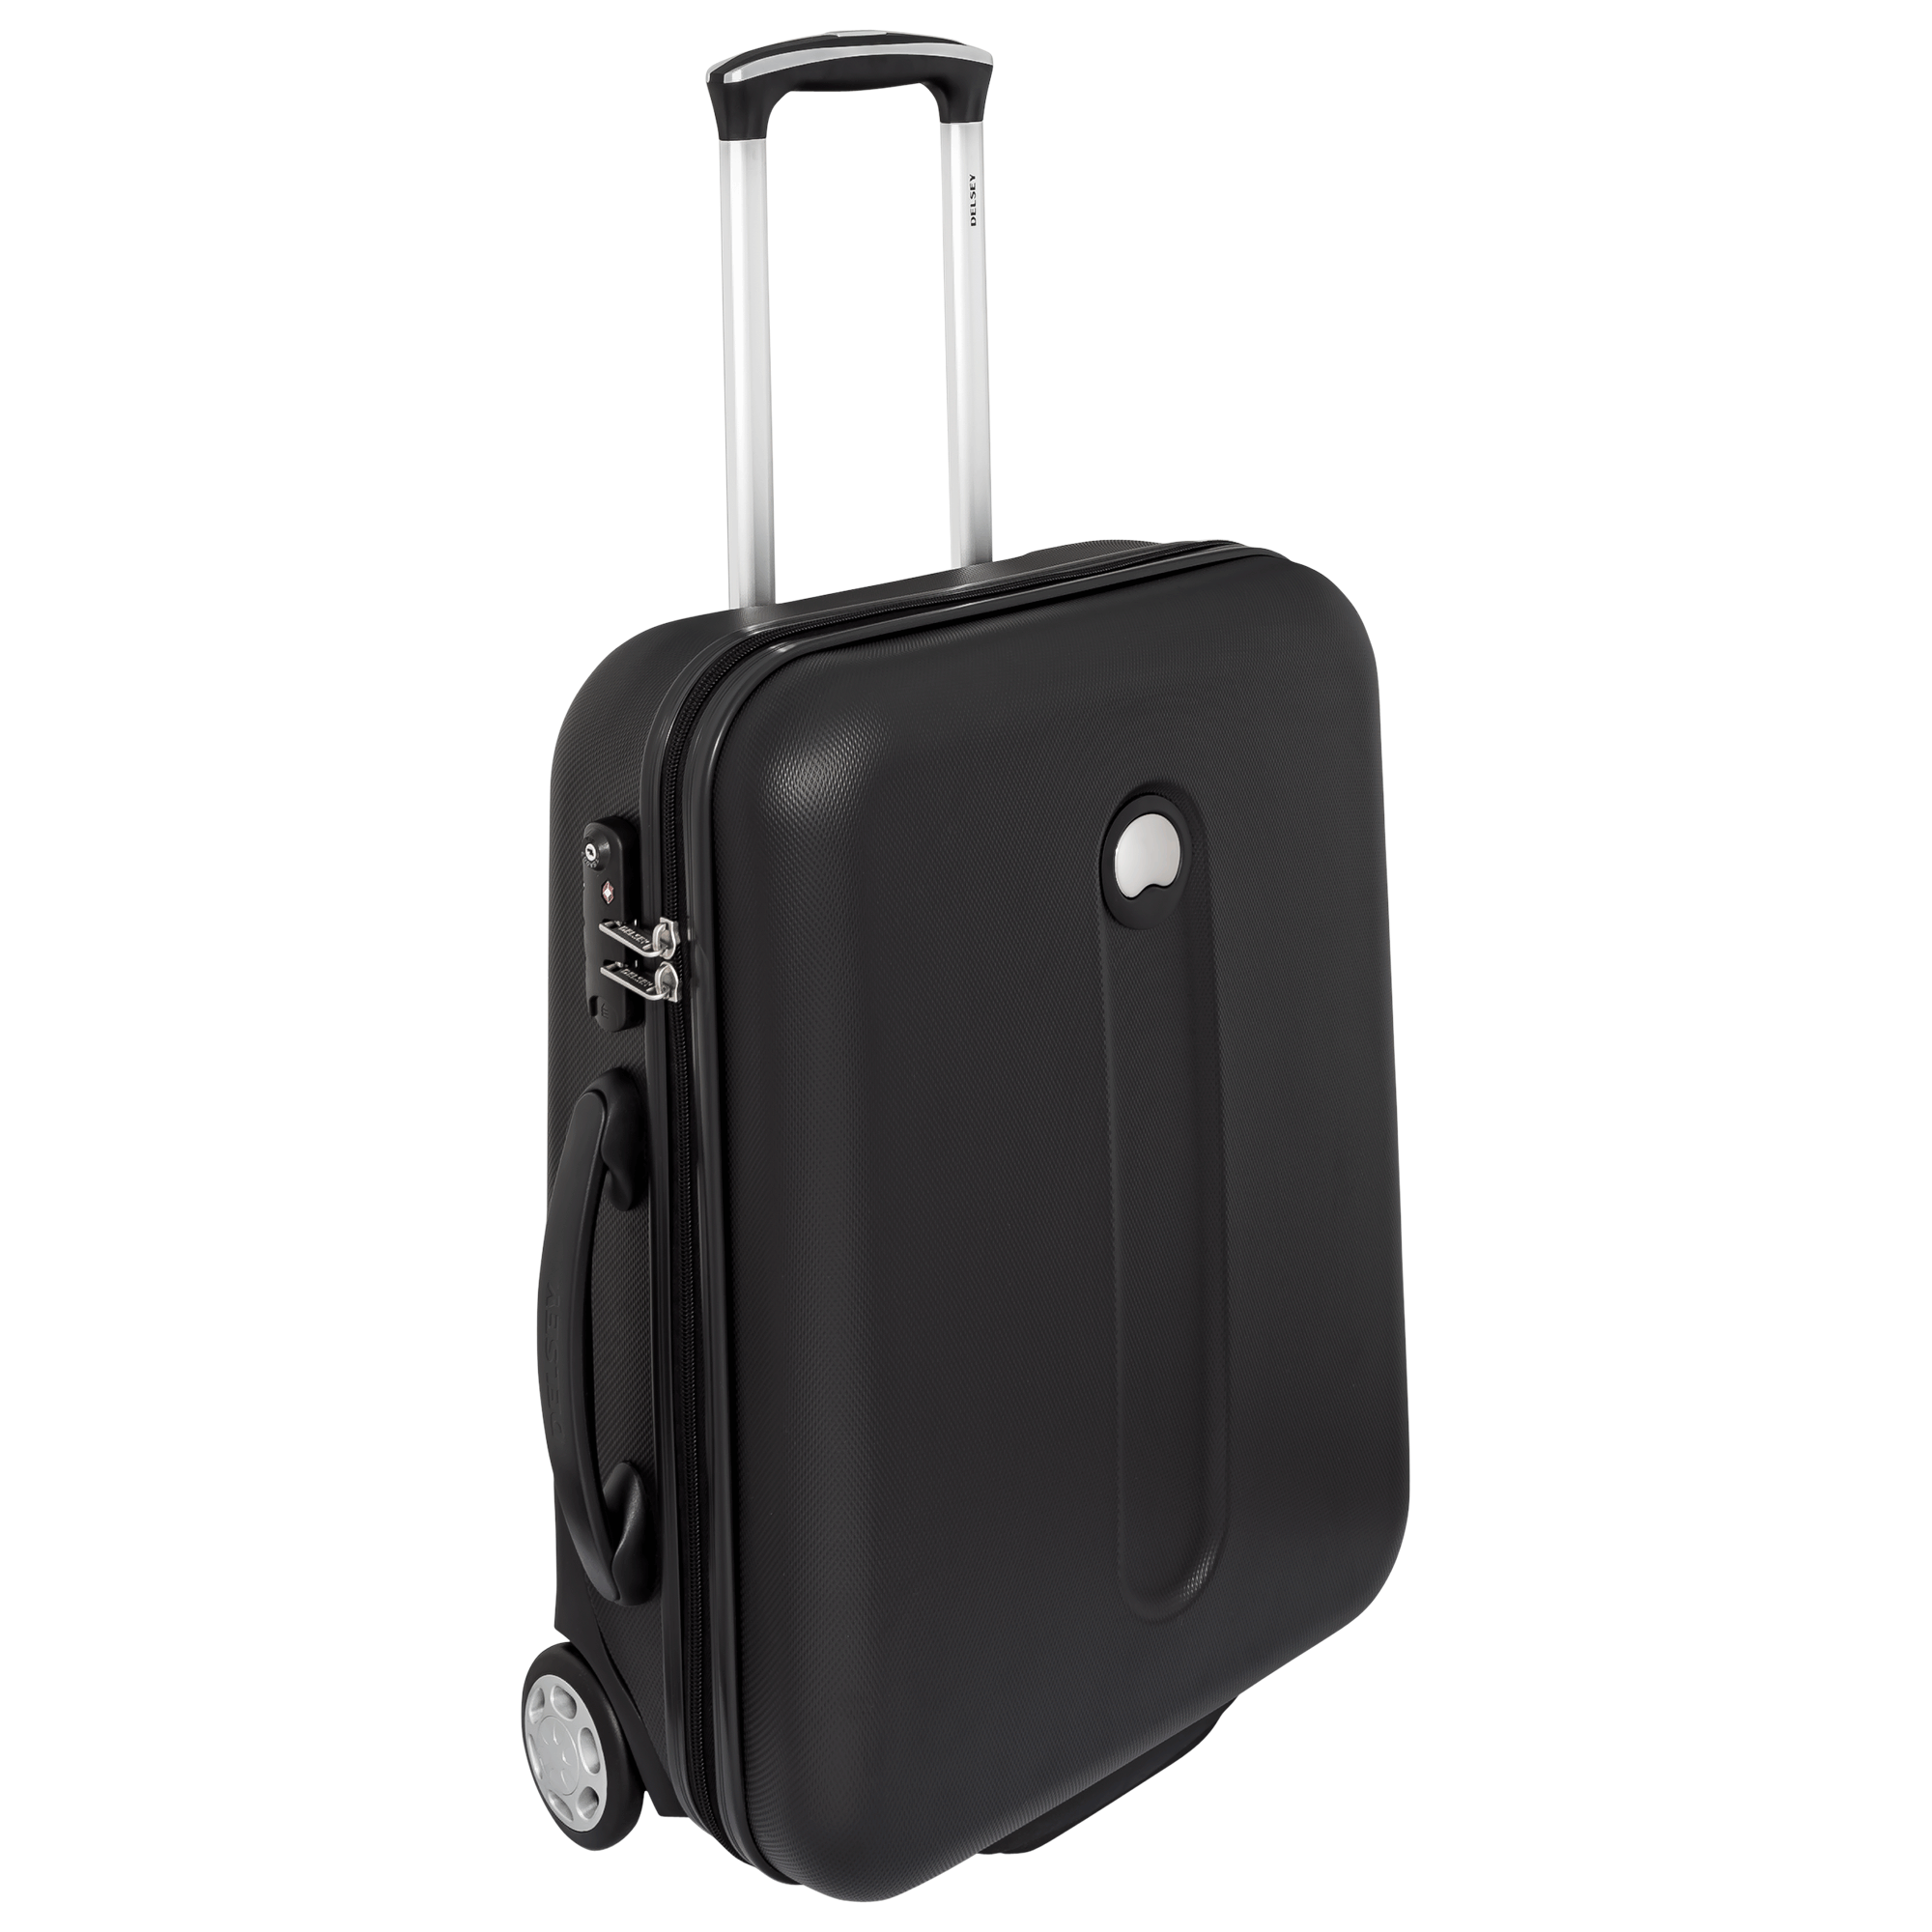 Black png image purepng. Luggage clipart travel accessory